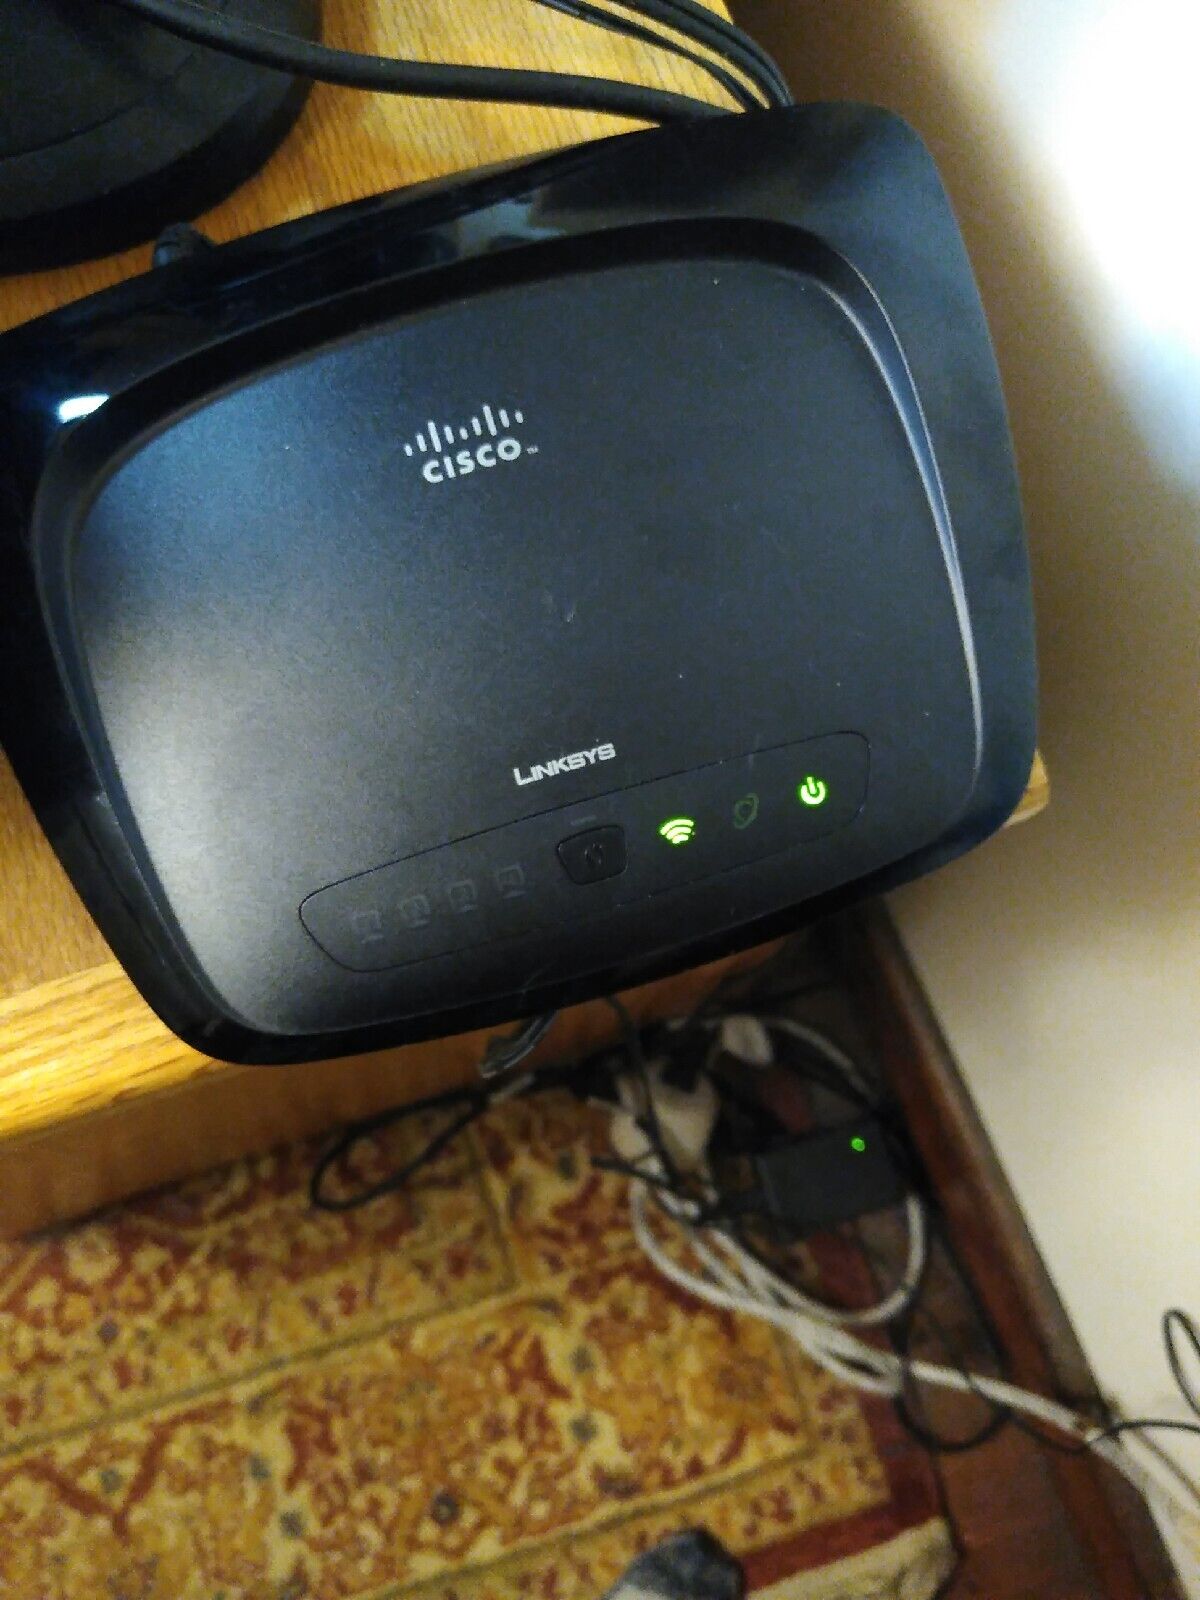 Linksys router by Cisco model WRT54GS2 V1